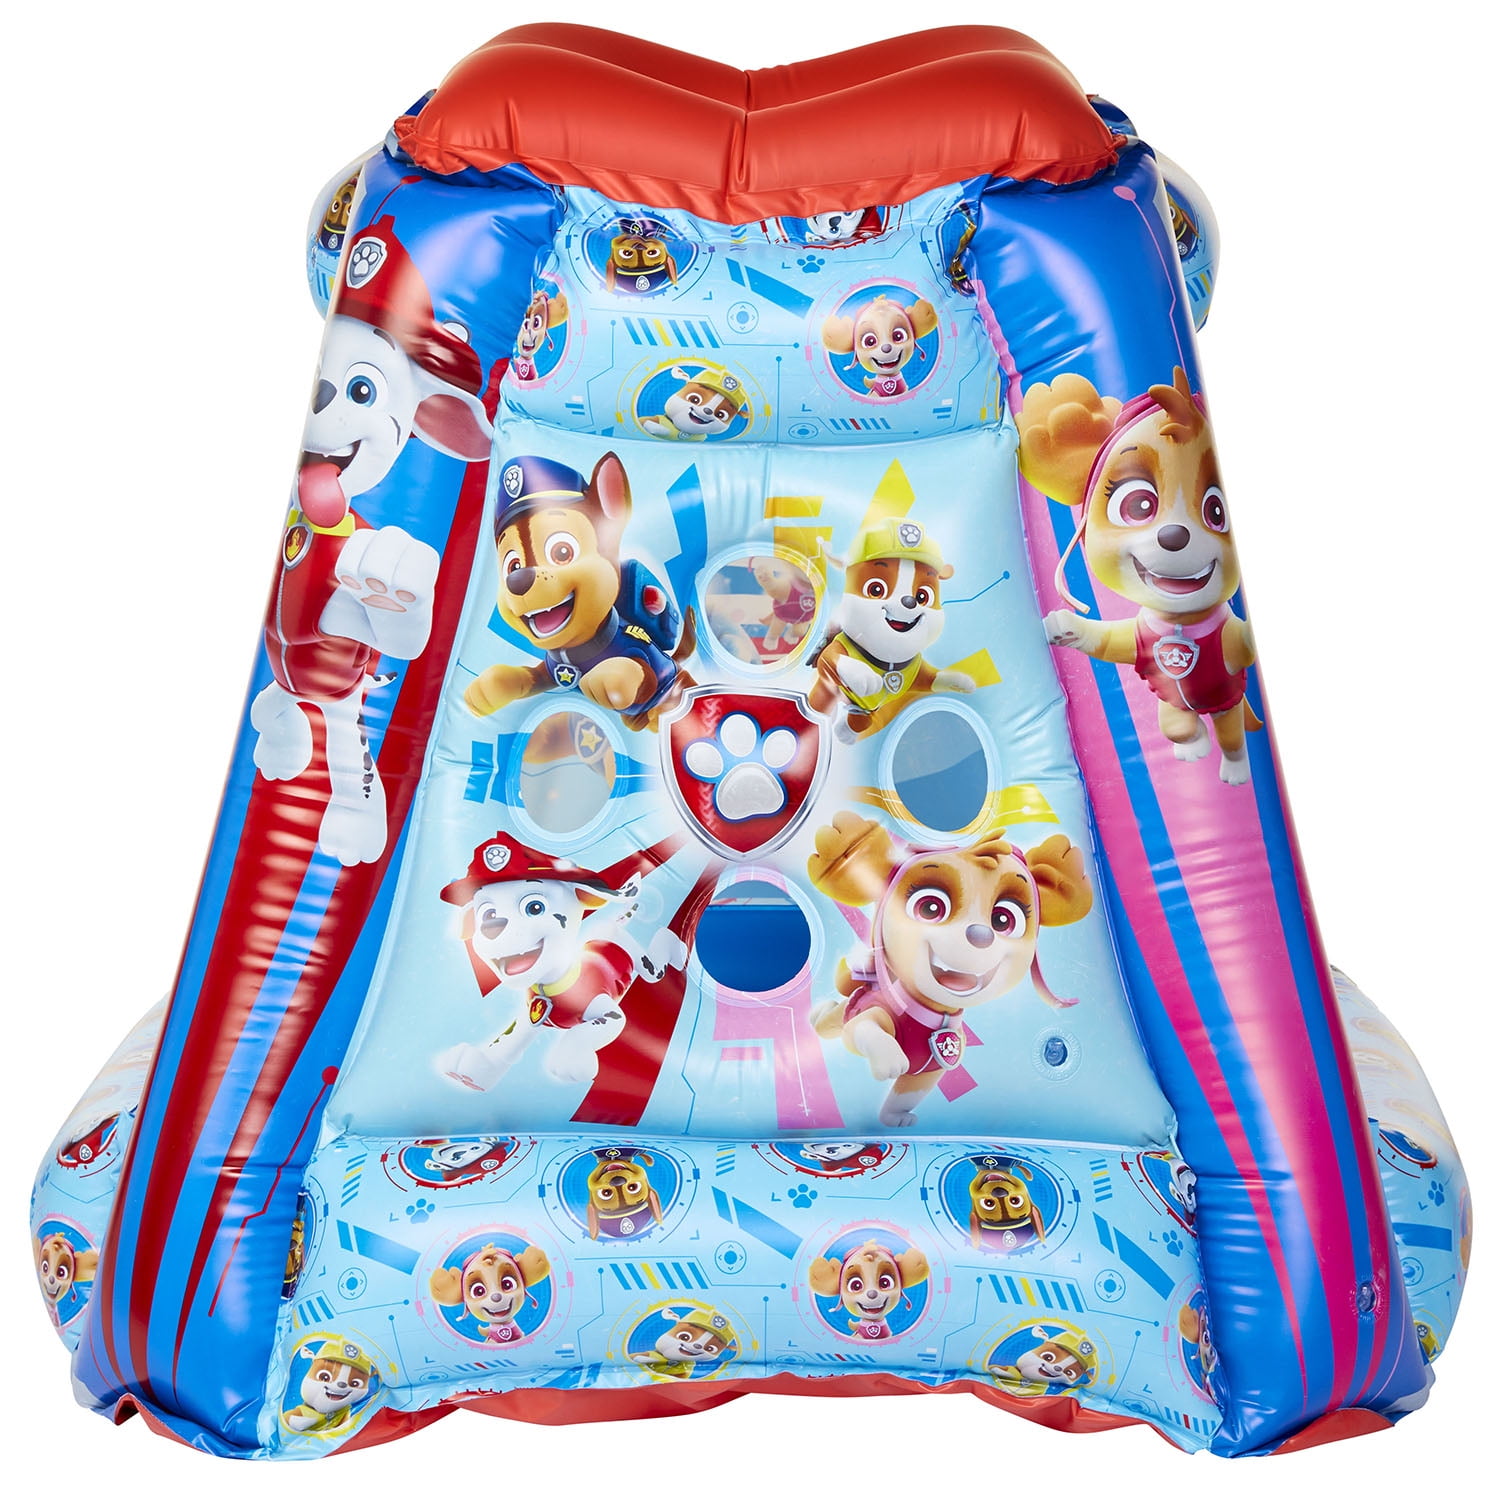 Nick Jr Paw Patrol Playland With 20 Balls for sale online 